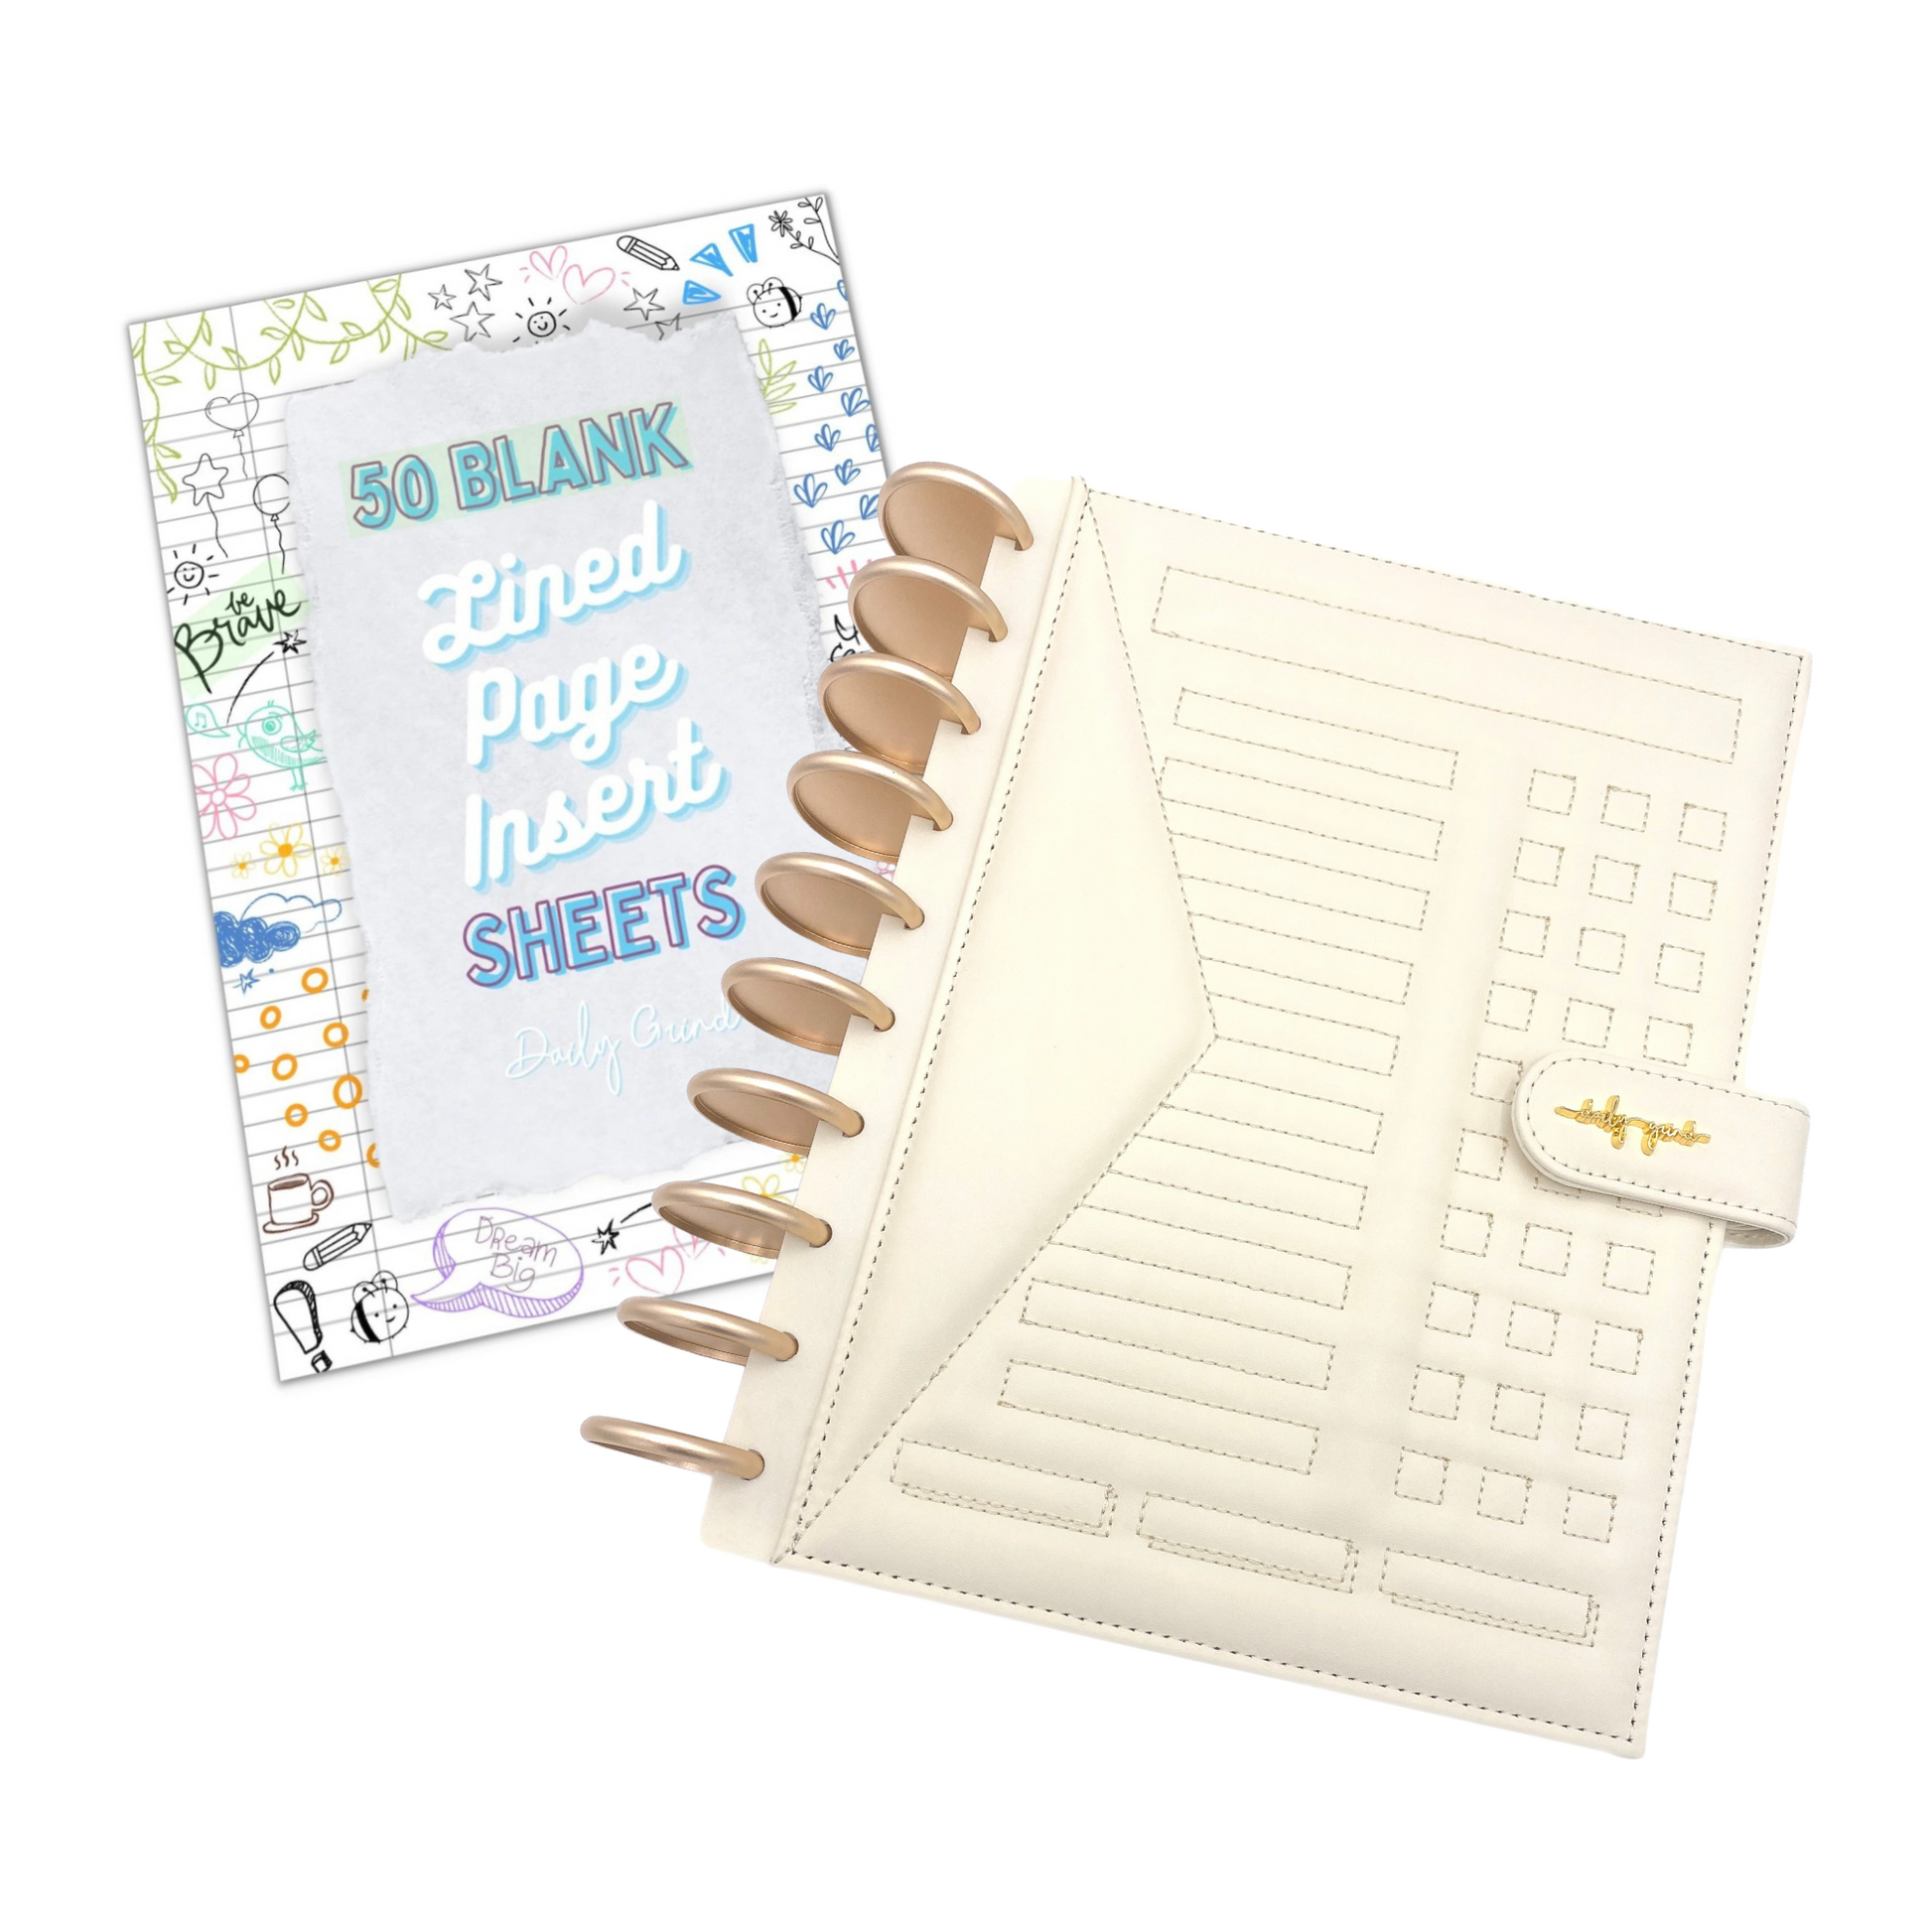 Cream planner and "50 Blank Lined Page Insert Sheets" cover page